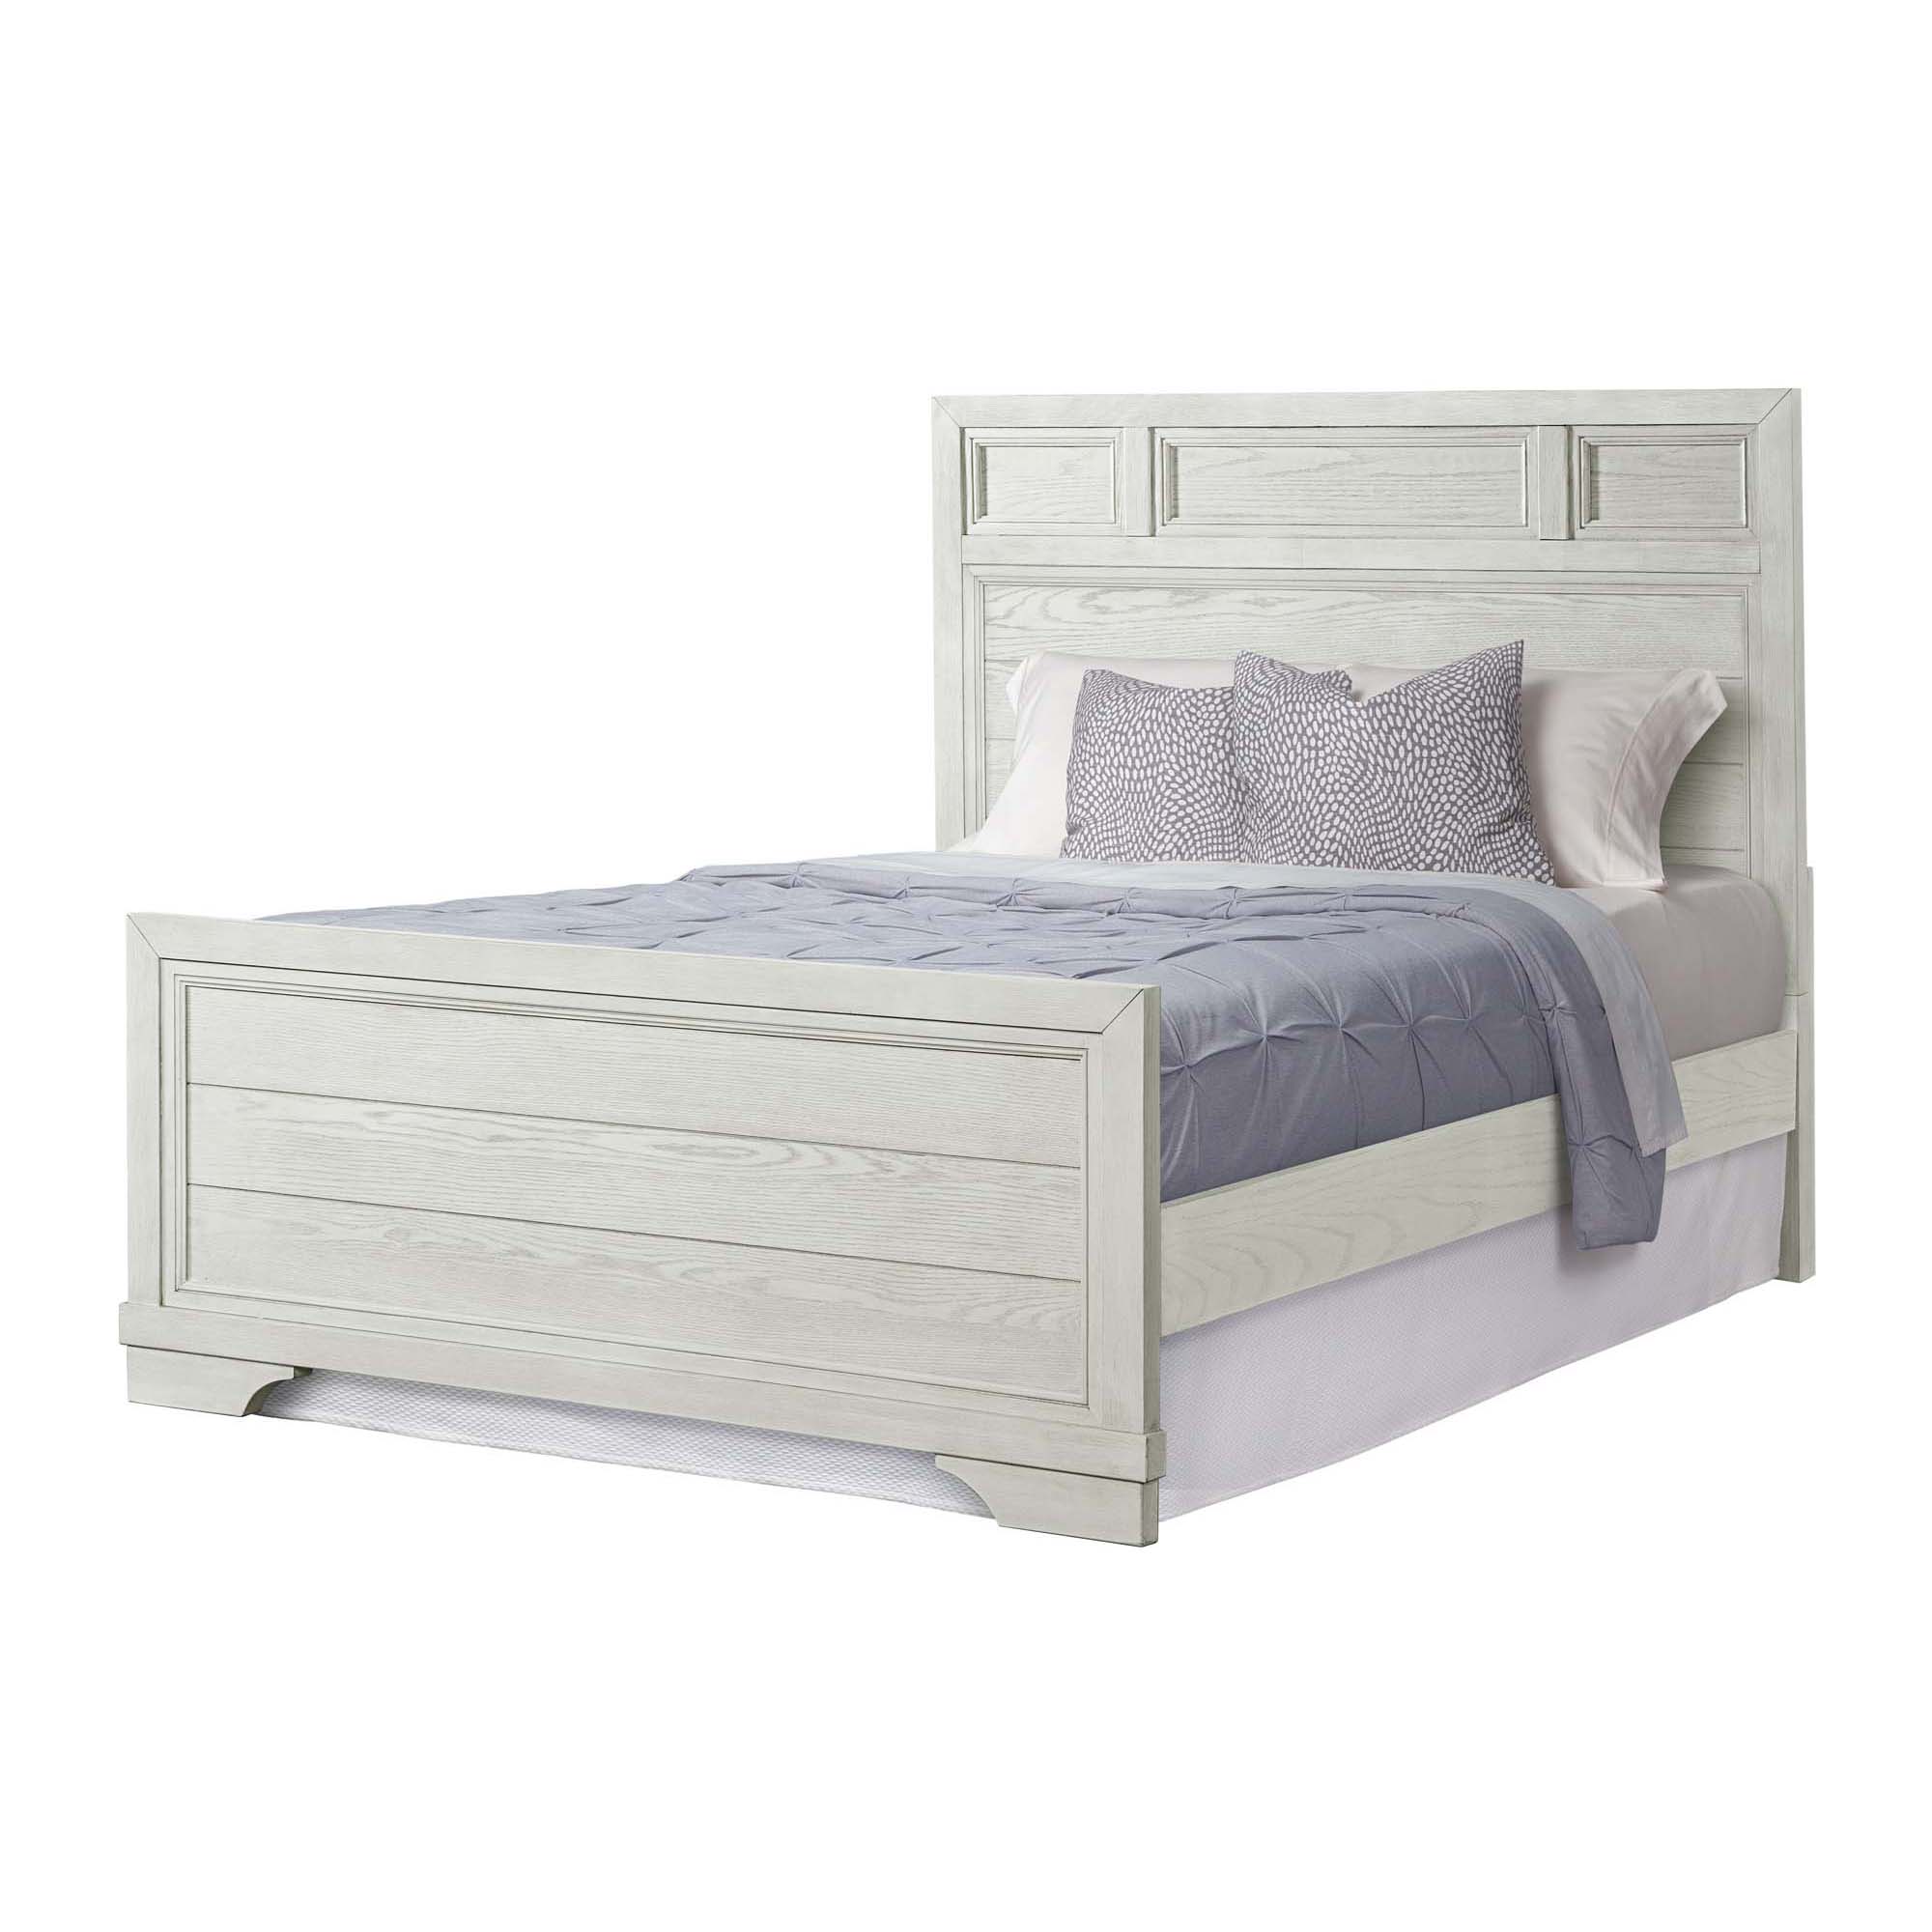 Foundry Full Bed | White Dove - WestWoodBaby